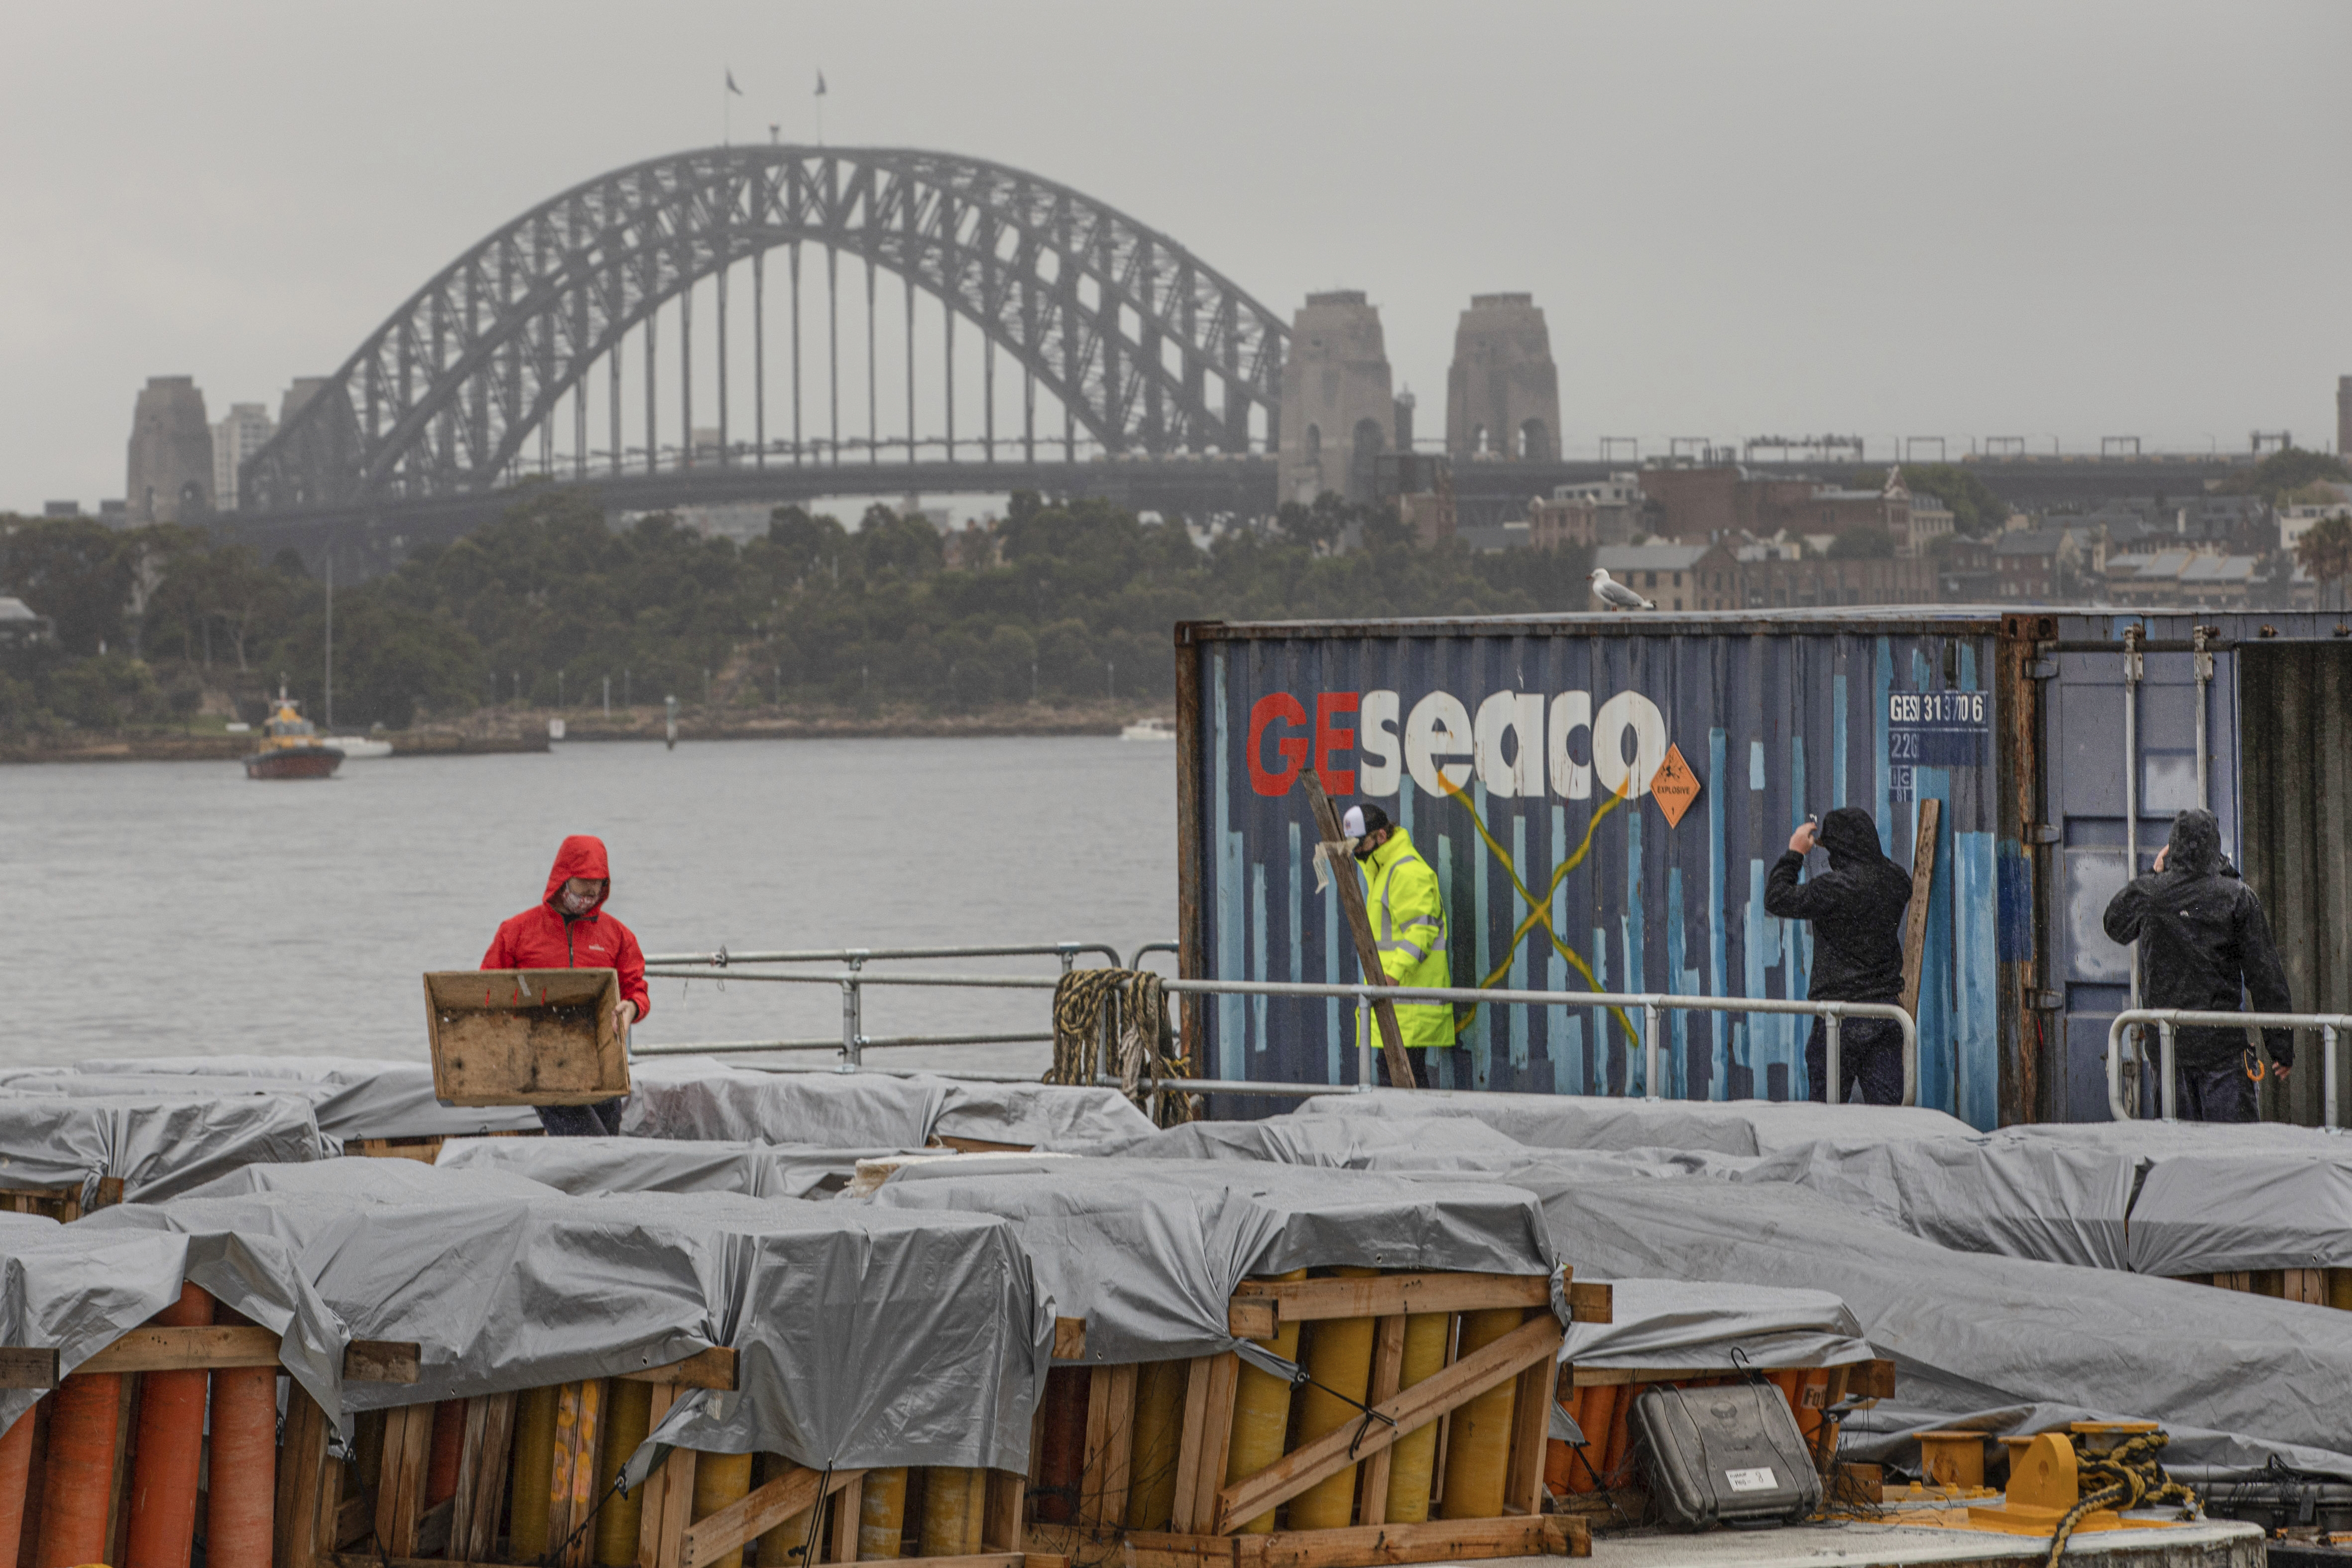 Foti International Fireworks workers ready a barge filled with fireworks for the 2021 NYE fireworks display at Glebe Island in Sydney on Wednesday, December 29, 2021. Photo by Cole Bennetts.